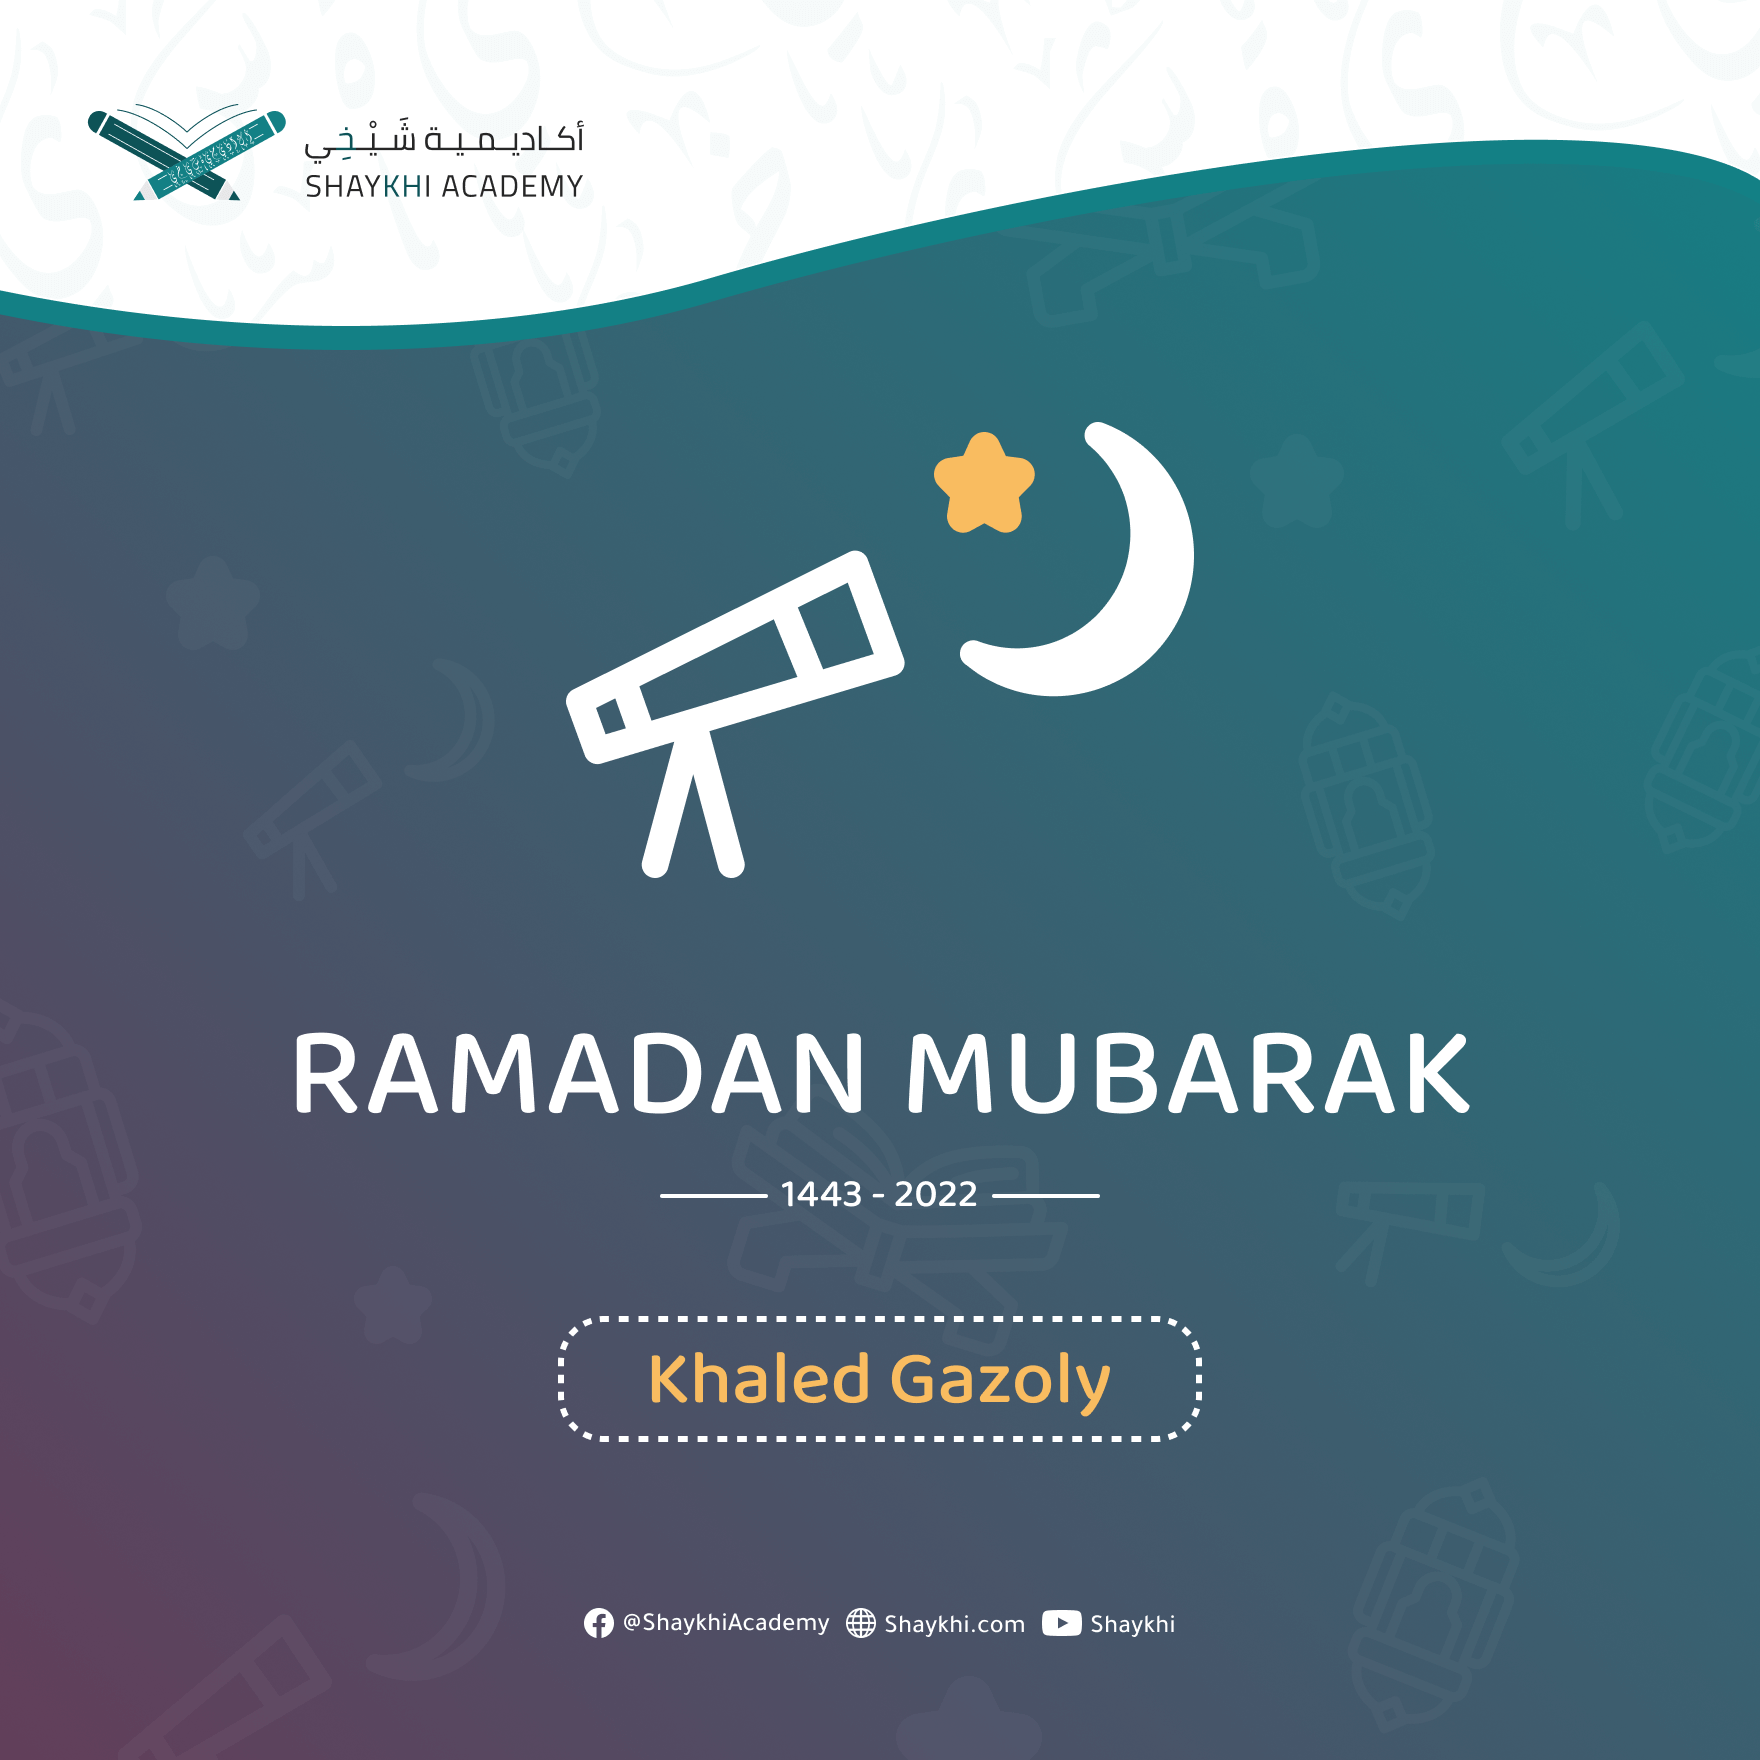 Ramadan Mubarak Images and Meaning - cards for Quran Students 7 Kids and teenagers